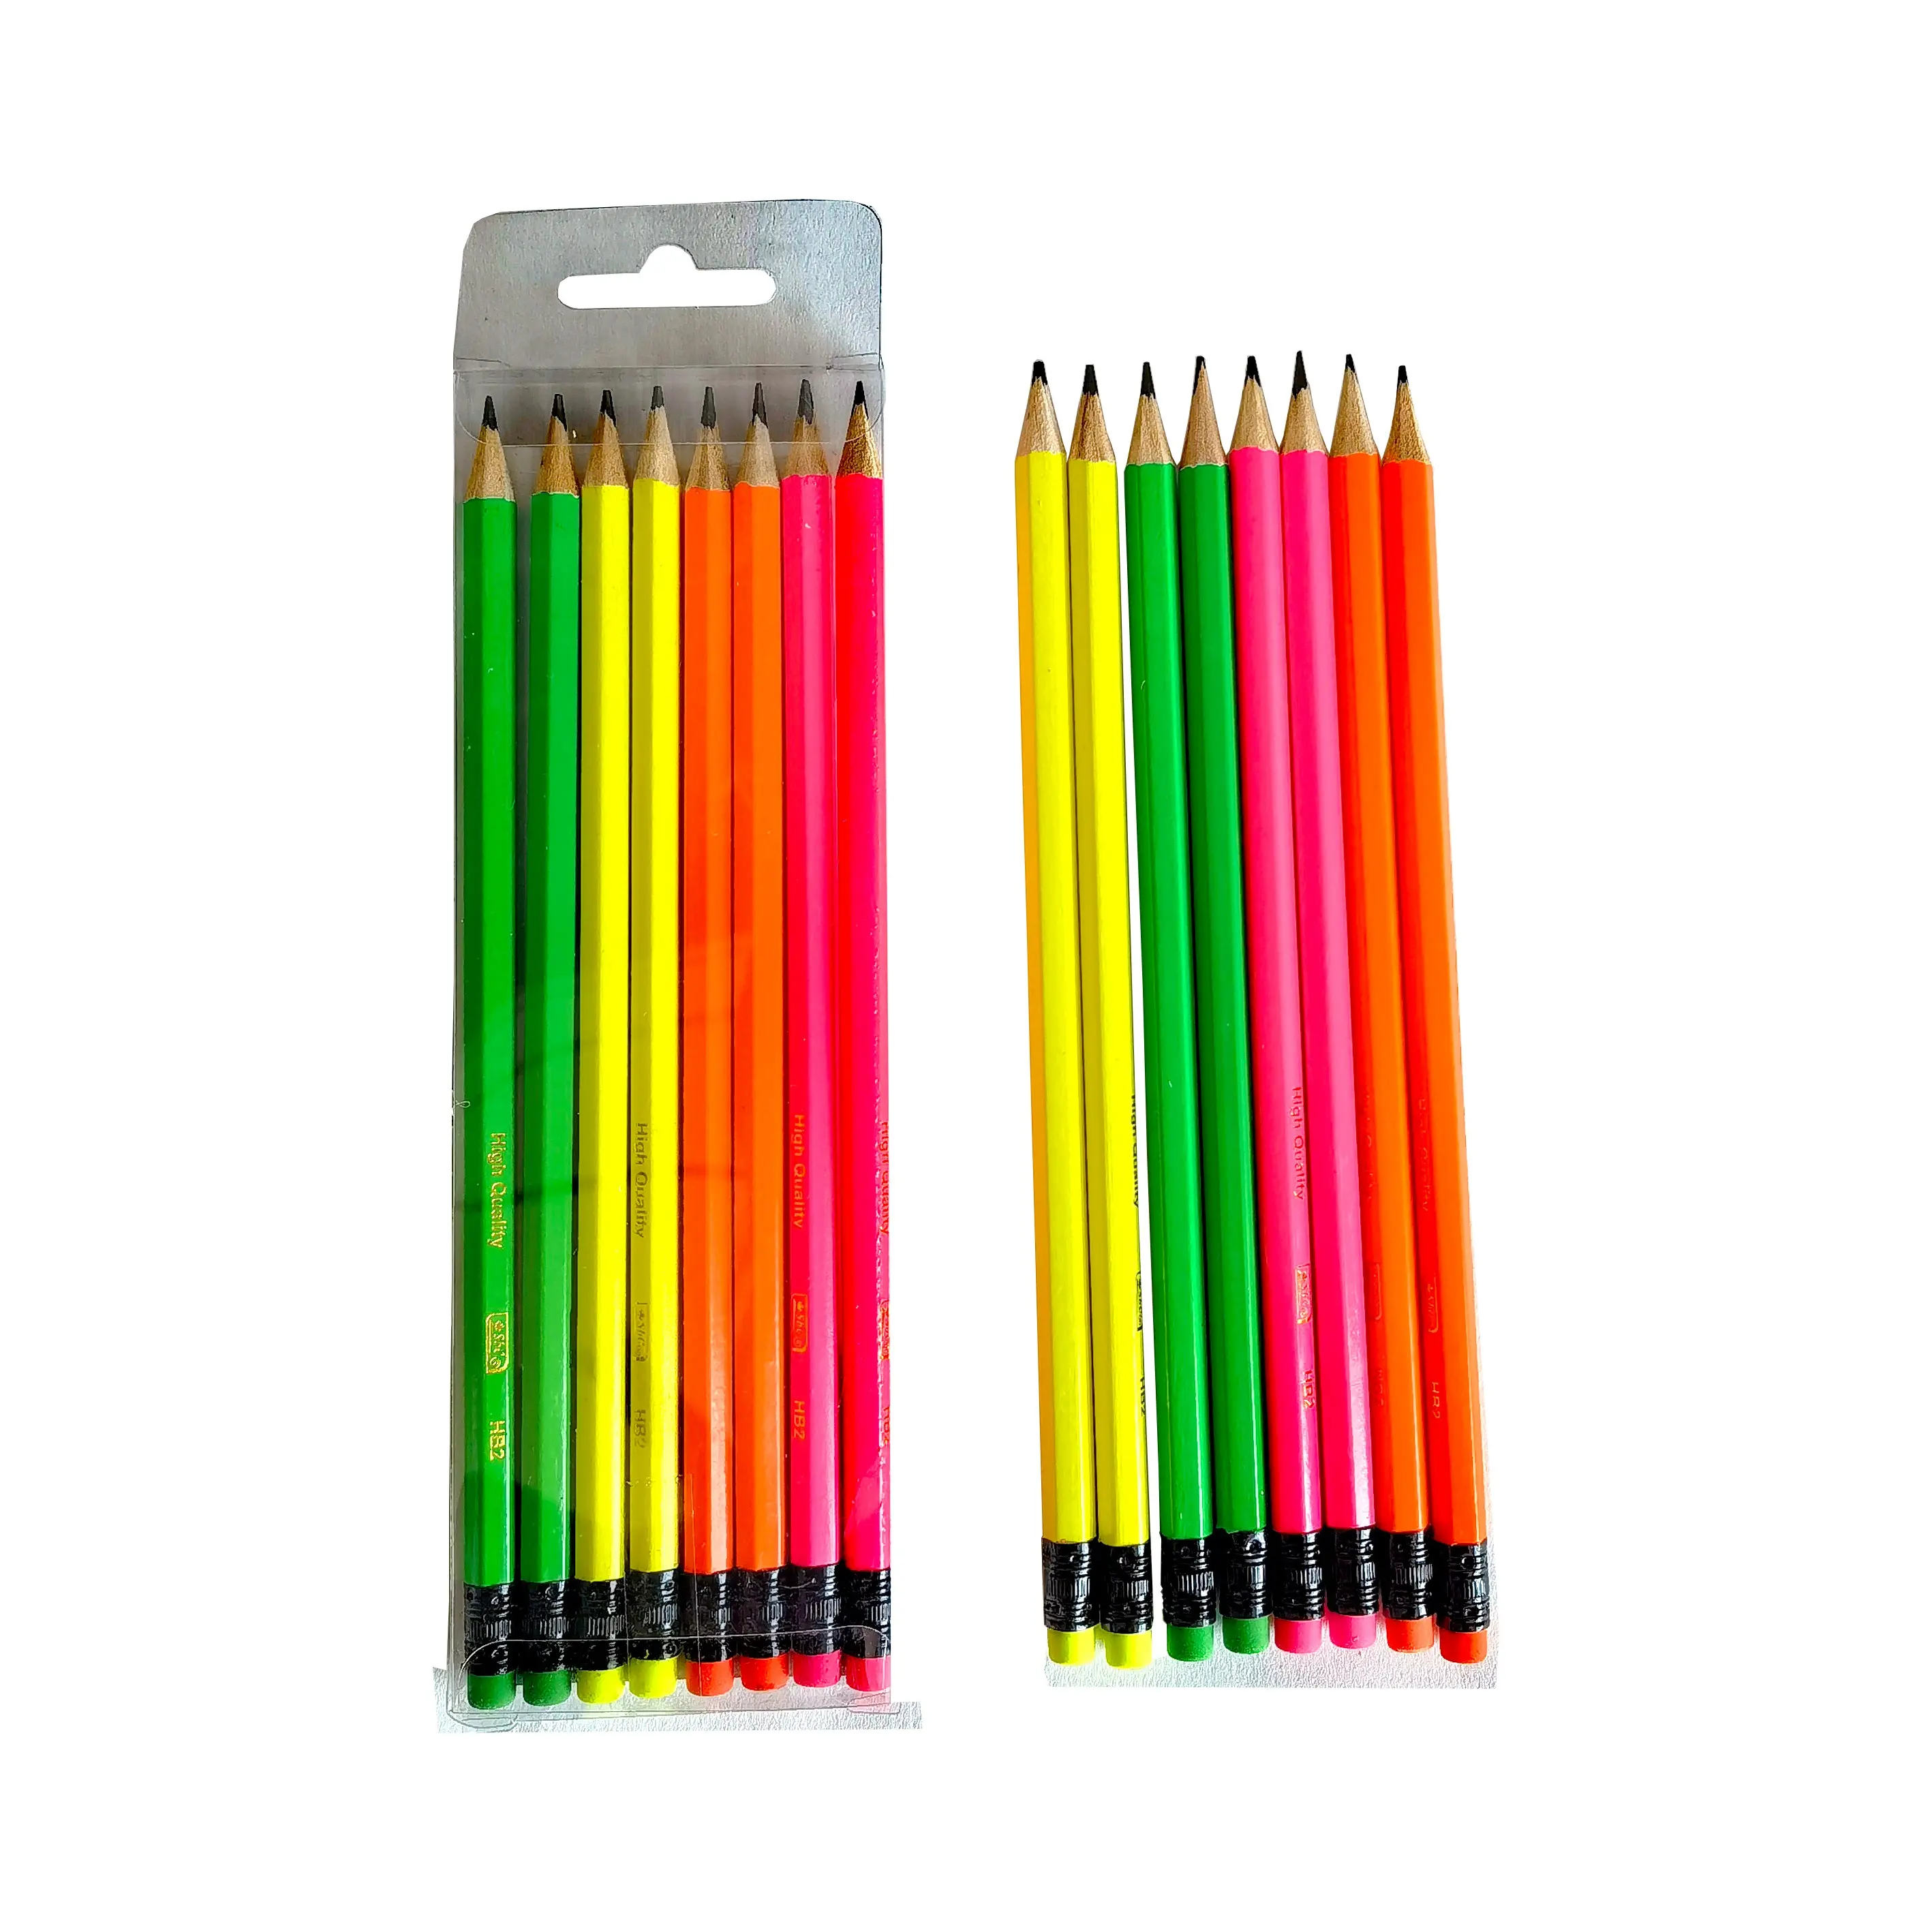 Eight to PVC box brightly wrapped HB wooden pencil 2 b pencil exam children to write with a pencil eraser color